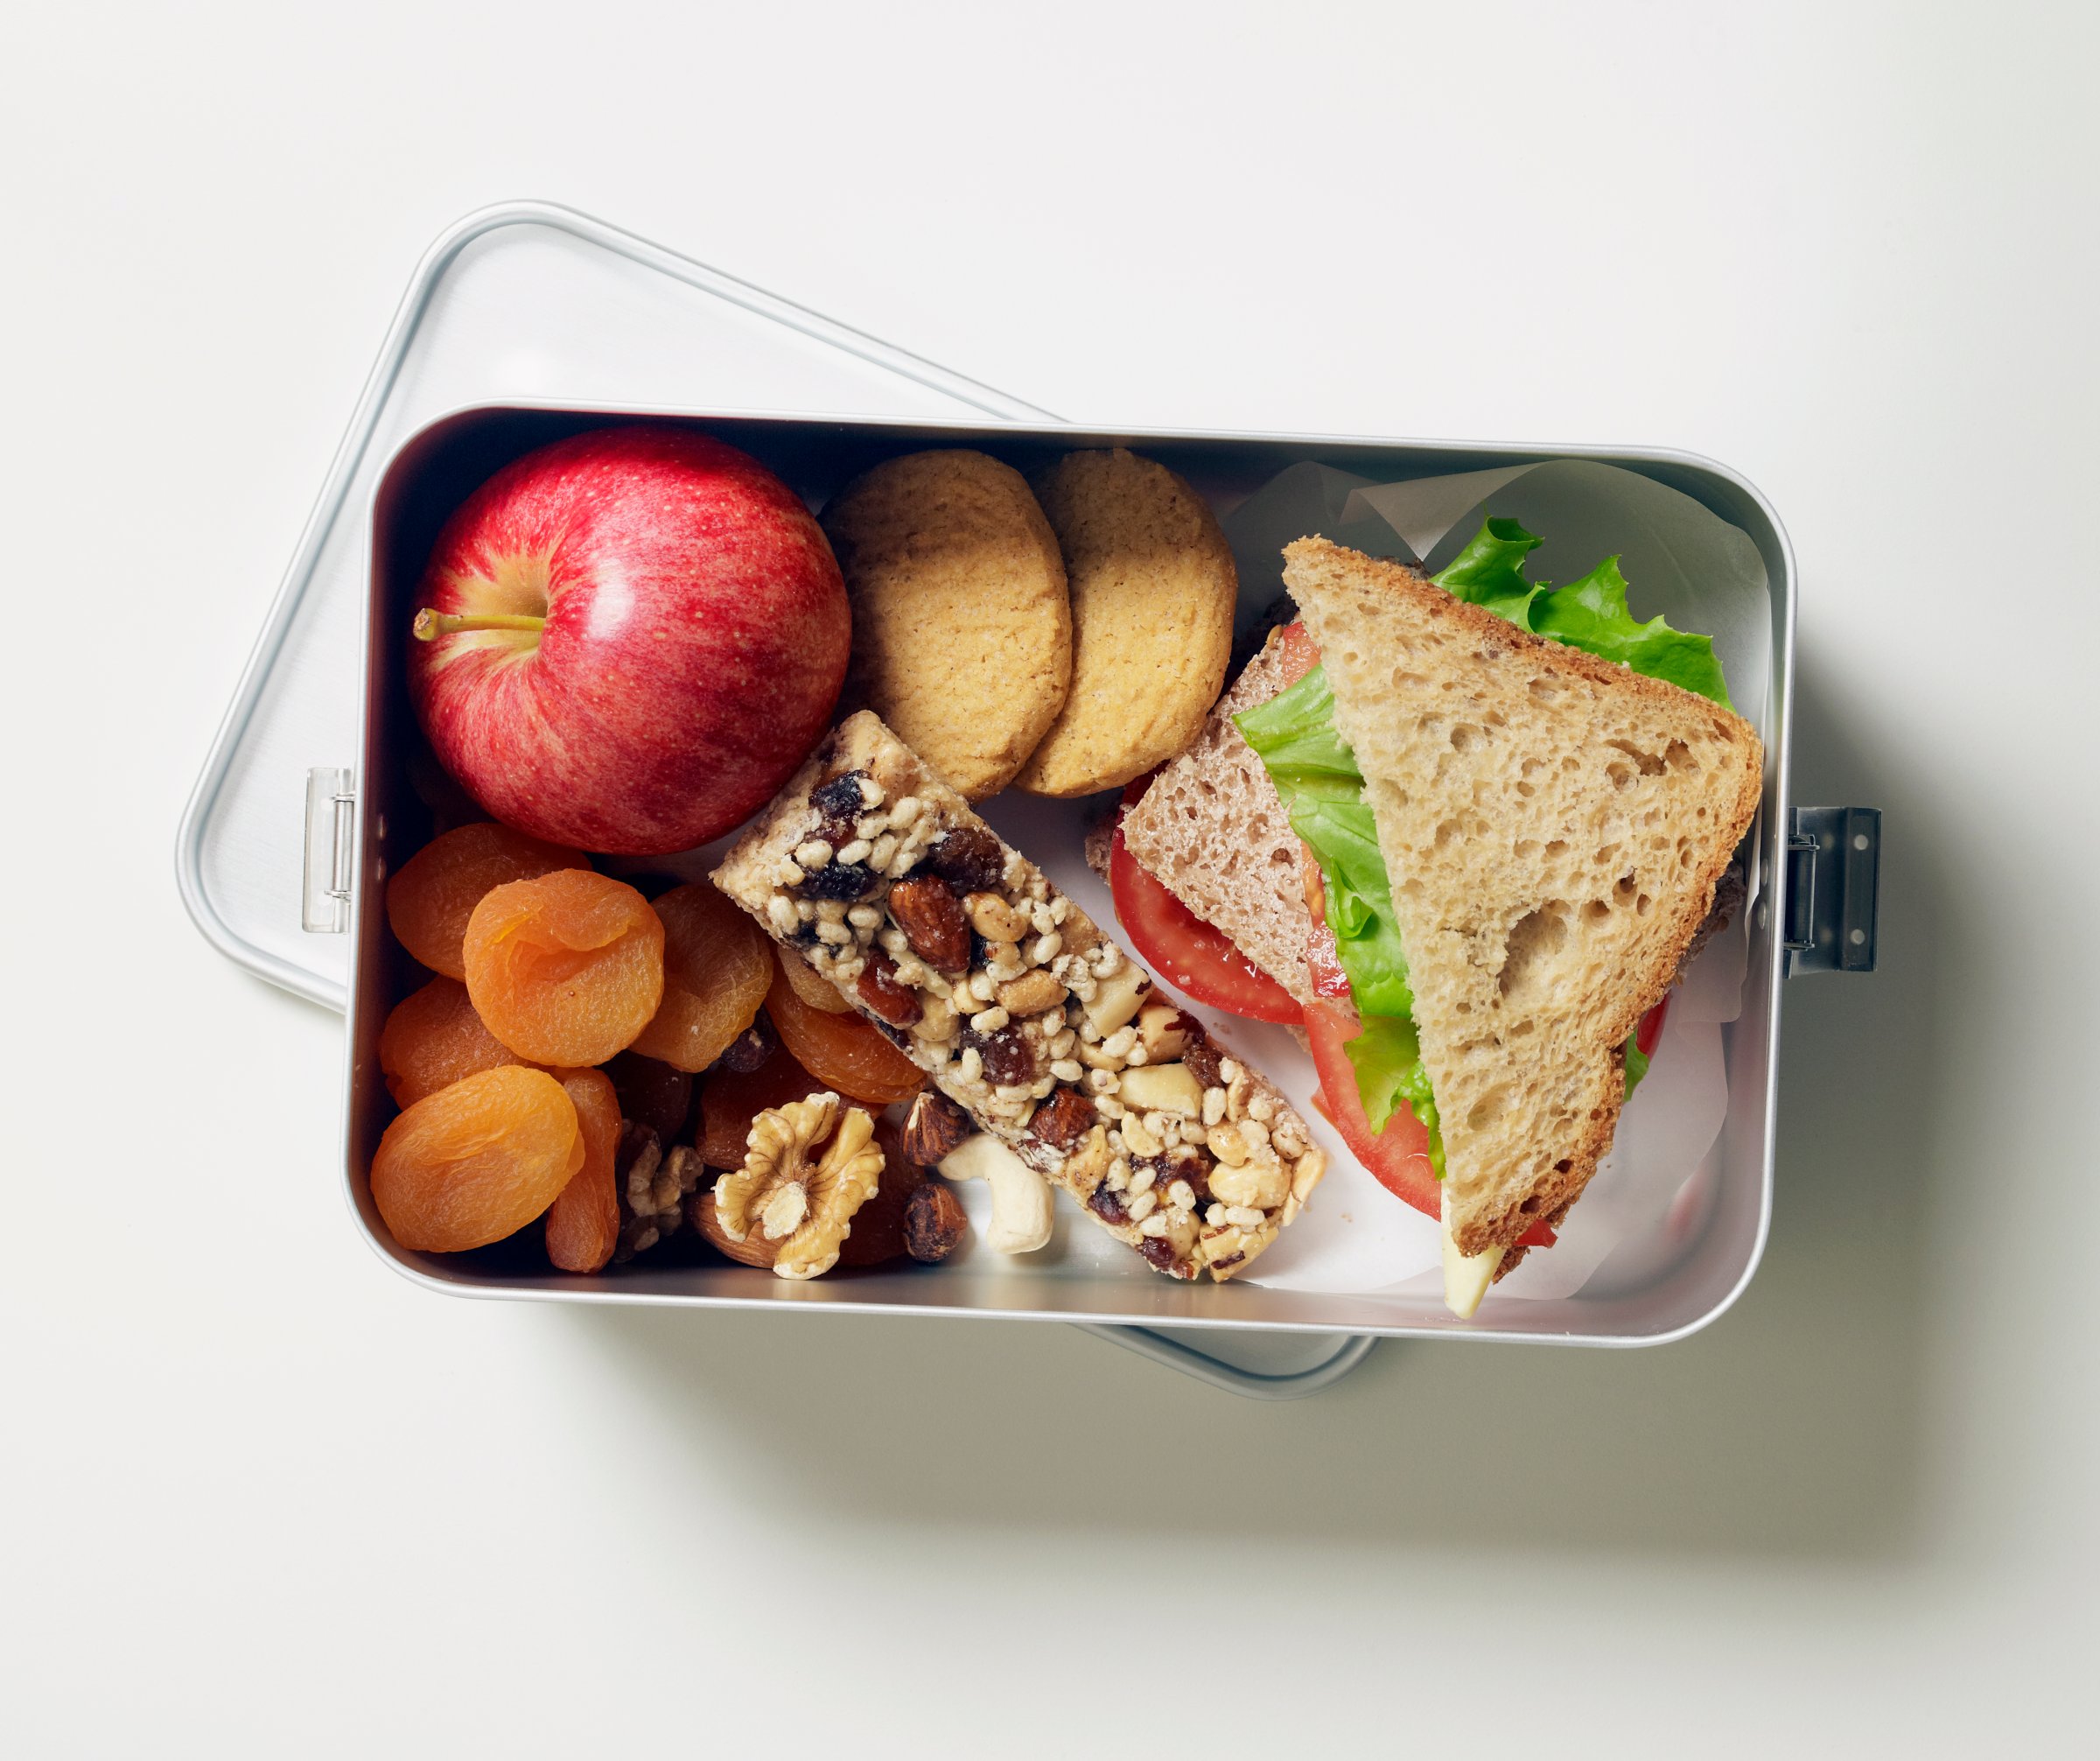 Gluten-free lunch box containing fruit, seed bar, biscuits and sandwiches